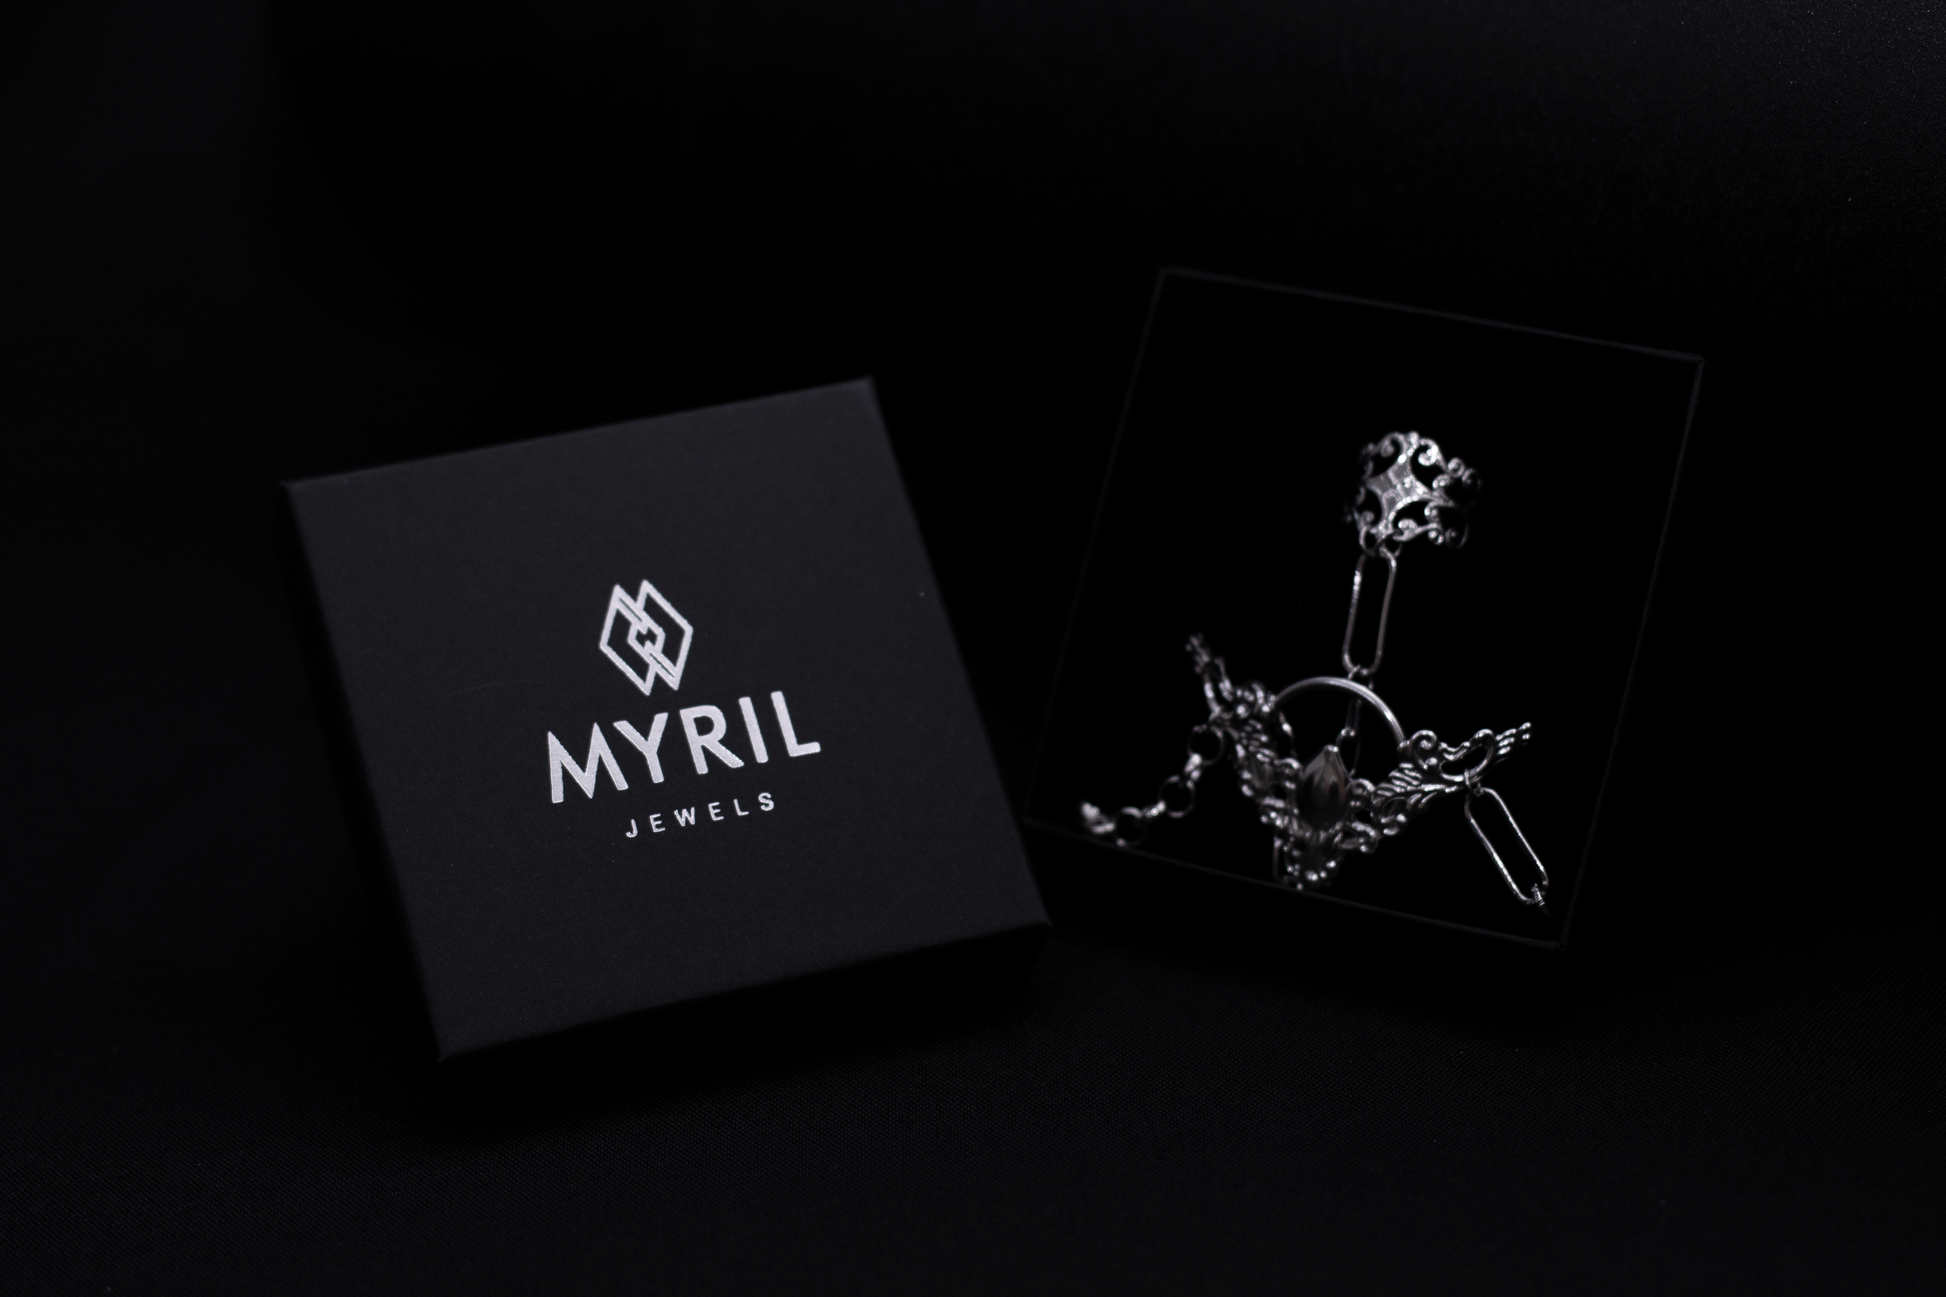 Myril Jewels presents a hand chain bracelet ring in its box, set against a black background, that combines neo-gothic intricacy with punk accents, perfect for avant-garde jewelry aficionados